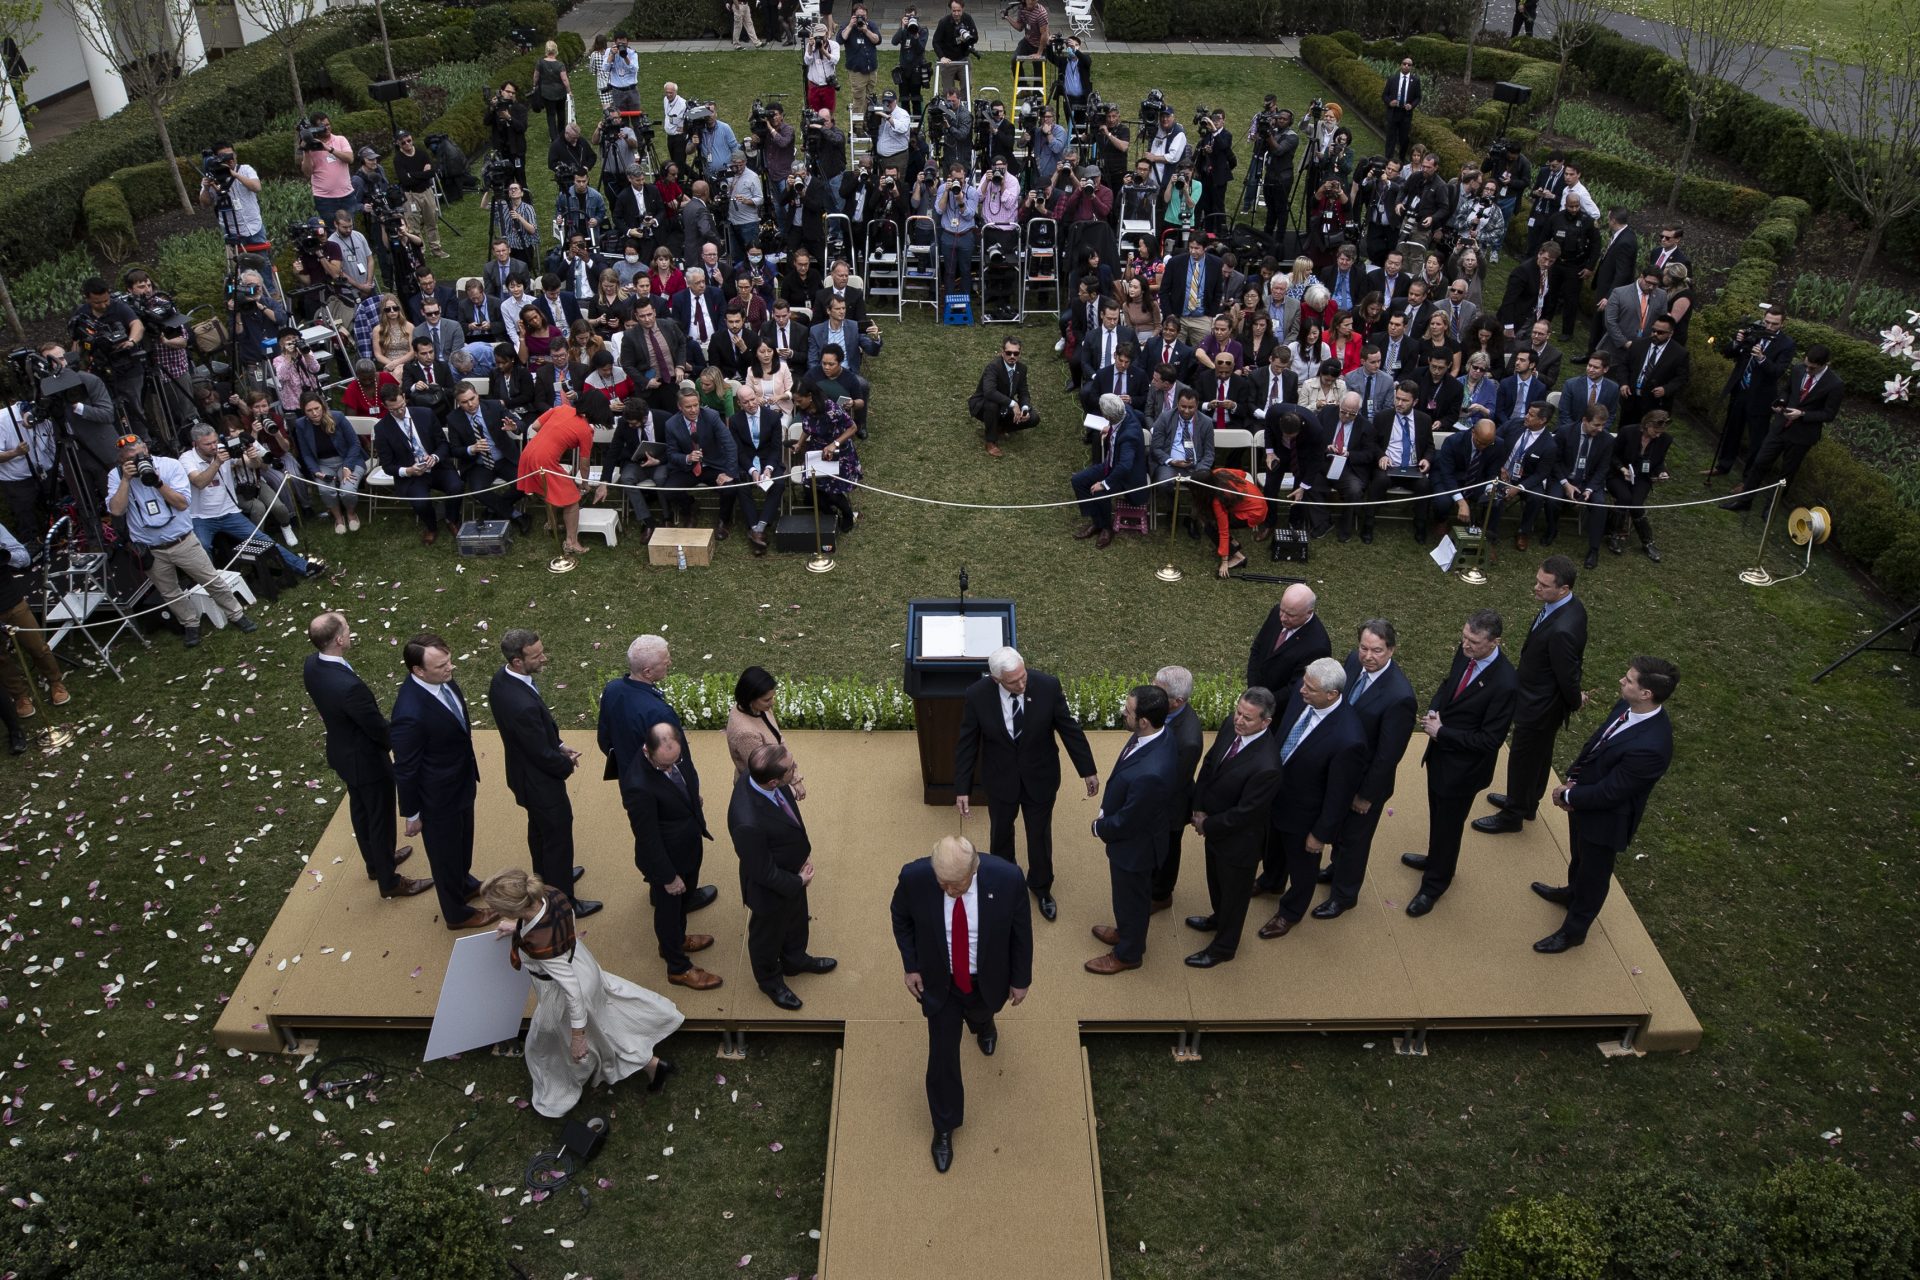 President Donald Trump departs after speaking during a news conference about the coronavirus in the Rose Garden at the White House, Friday, March 13, 2020, in Washington.